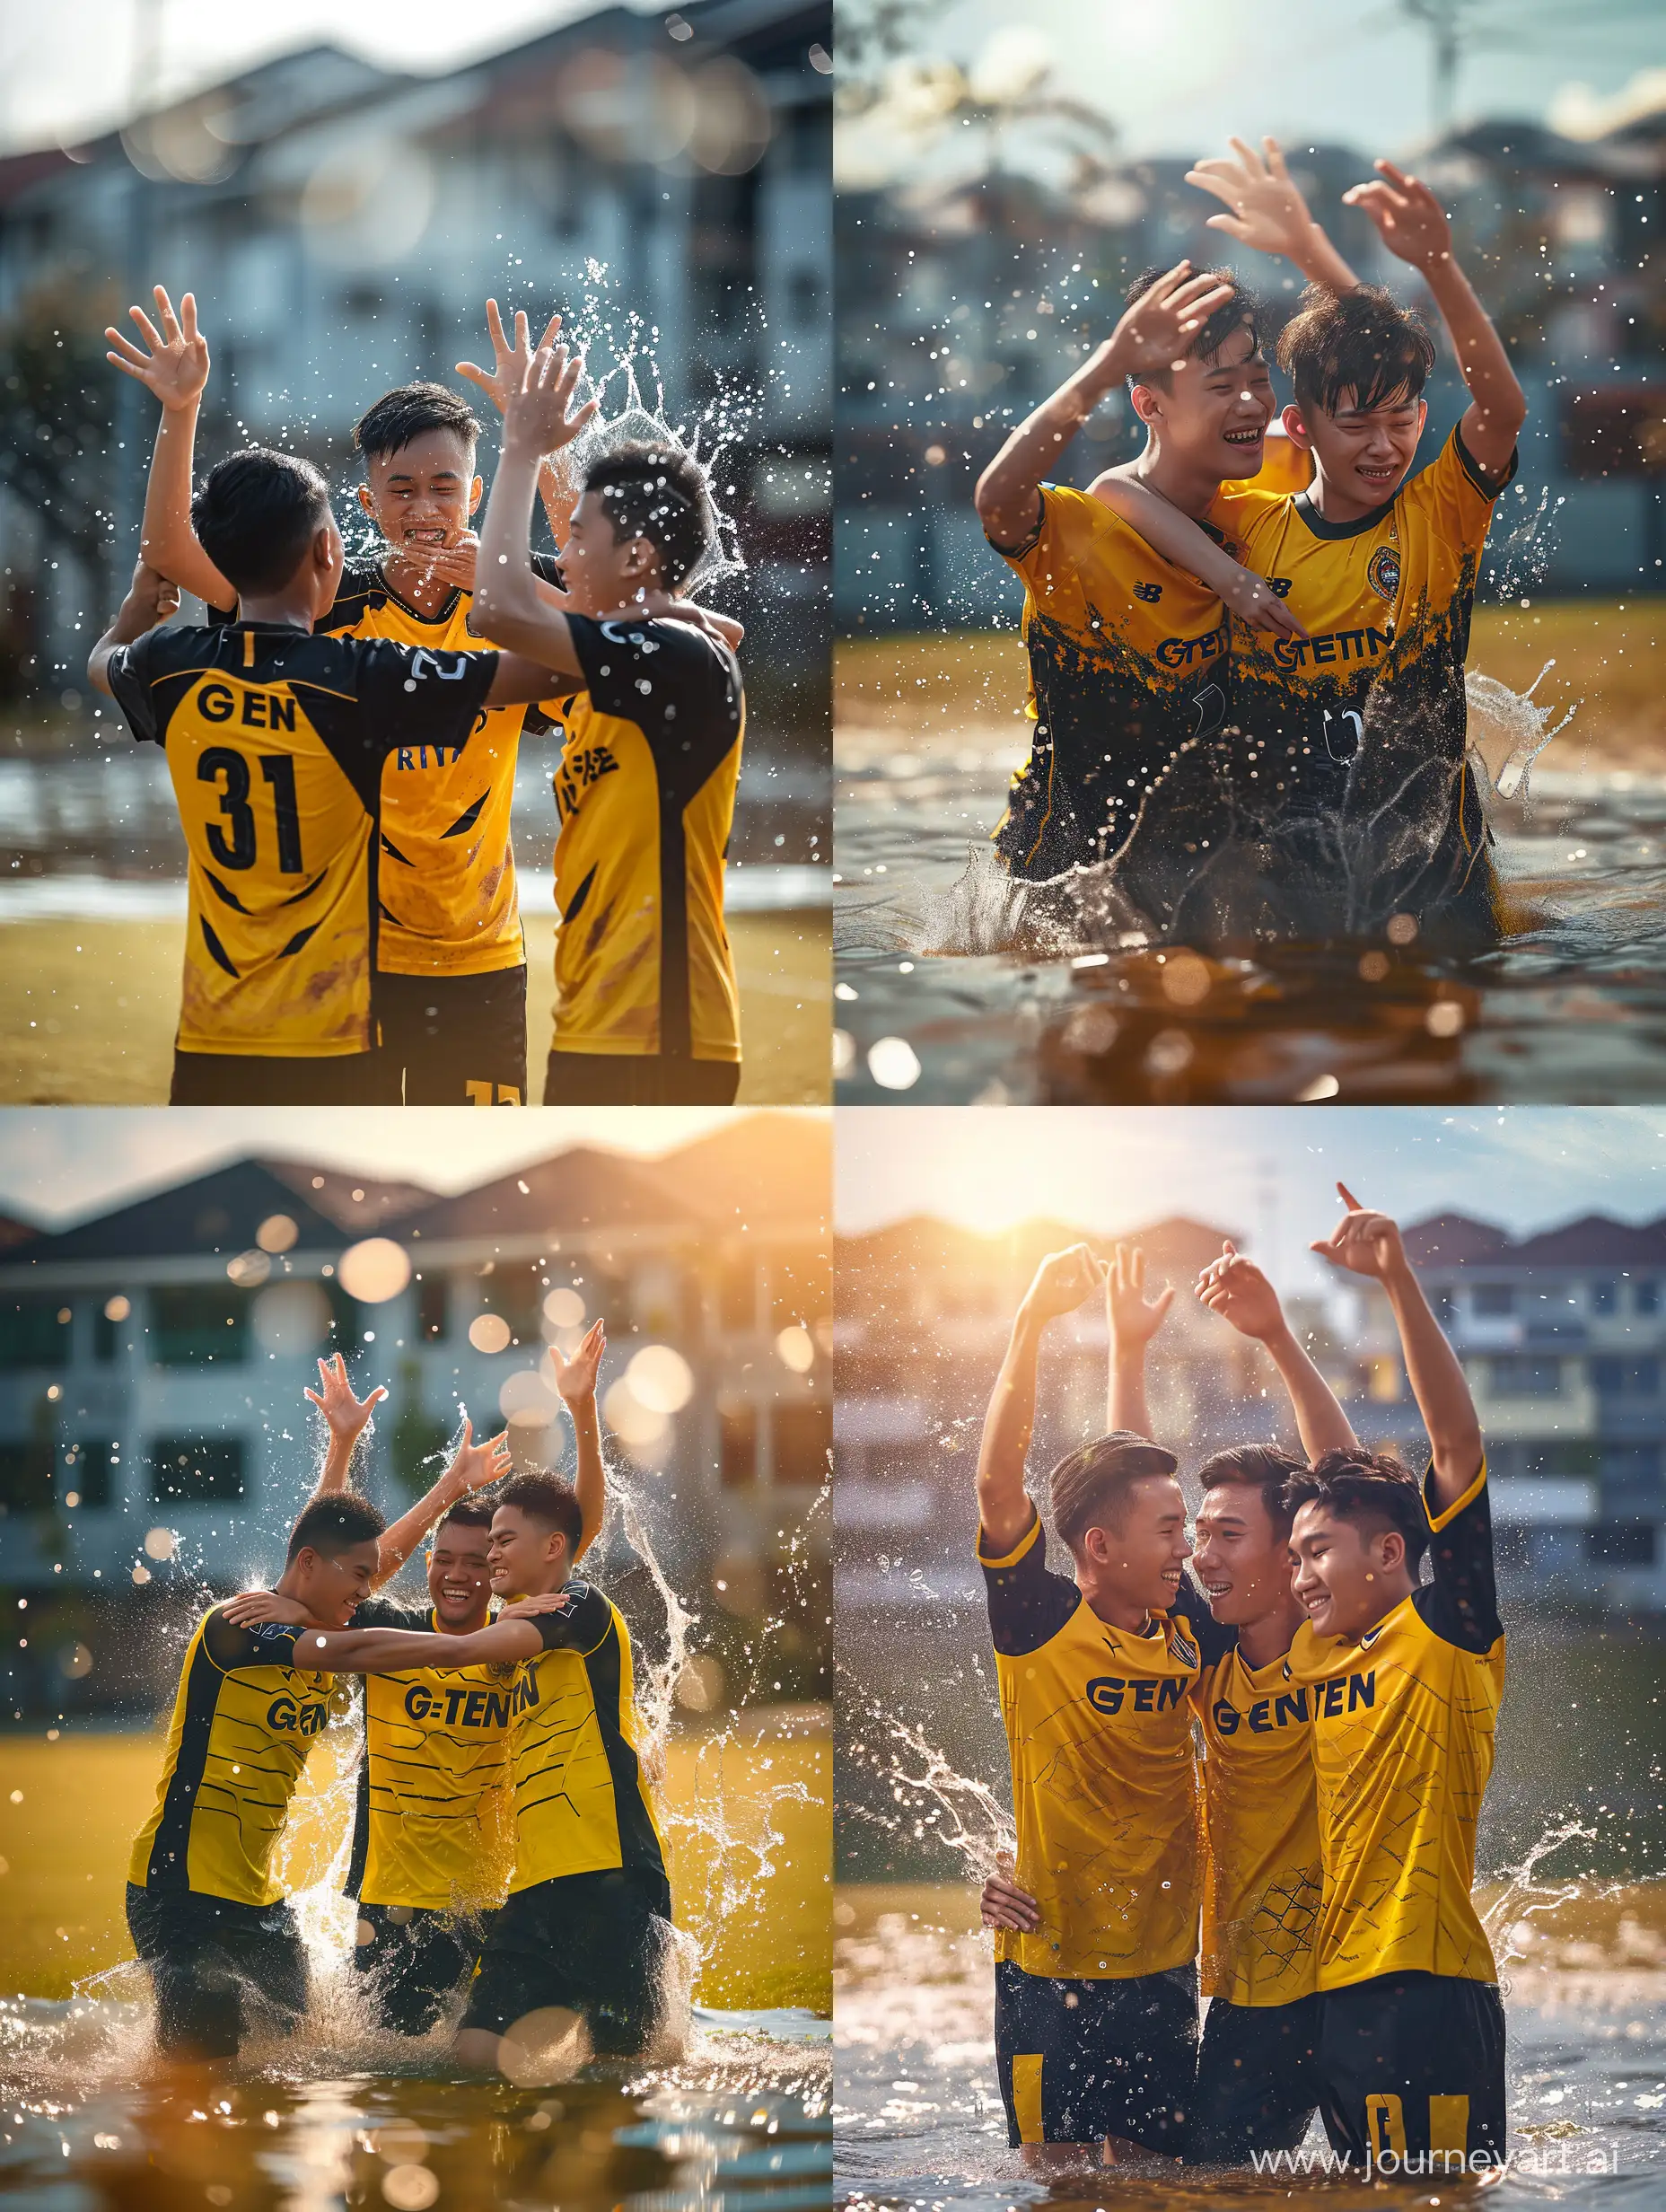 Ultra realistic, 3 malay soccer players do a goal celebration. hug while raising hands. yellow and black jersey. there is 'G-TEN' written on the jersey. there is a splash of water in the syntactic field. housing estate background. refraction of sunlight. canon eos-id x mark iii dslr --v 6.0